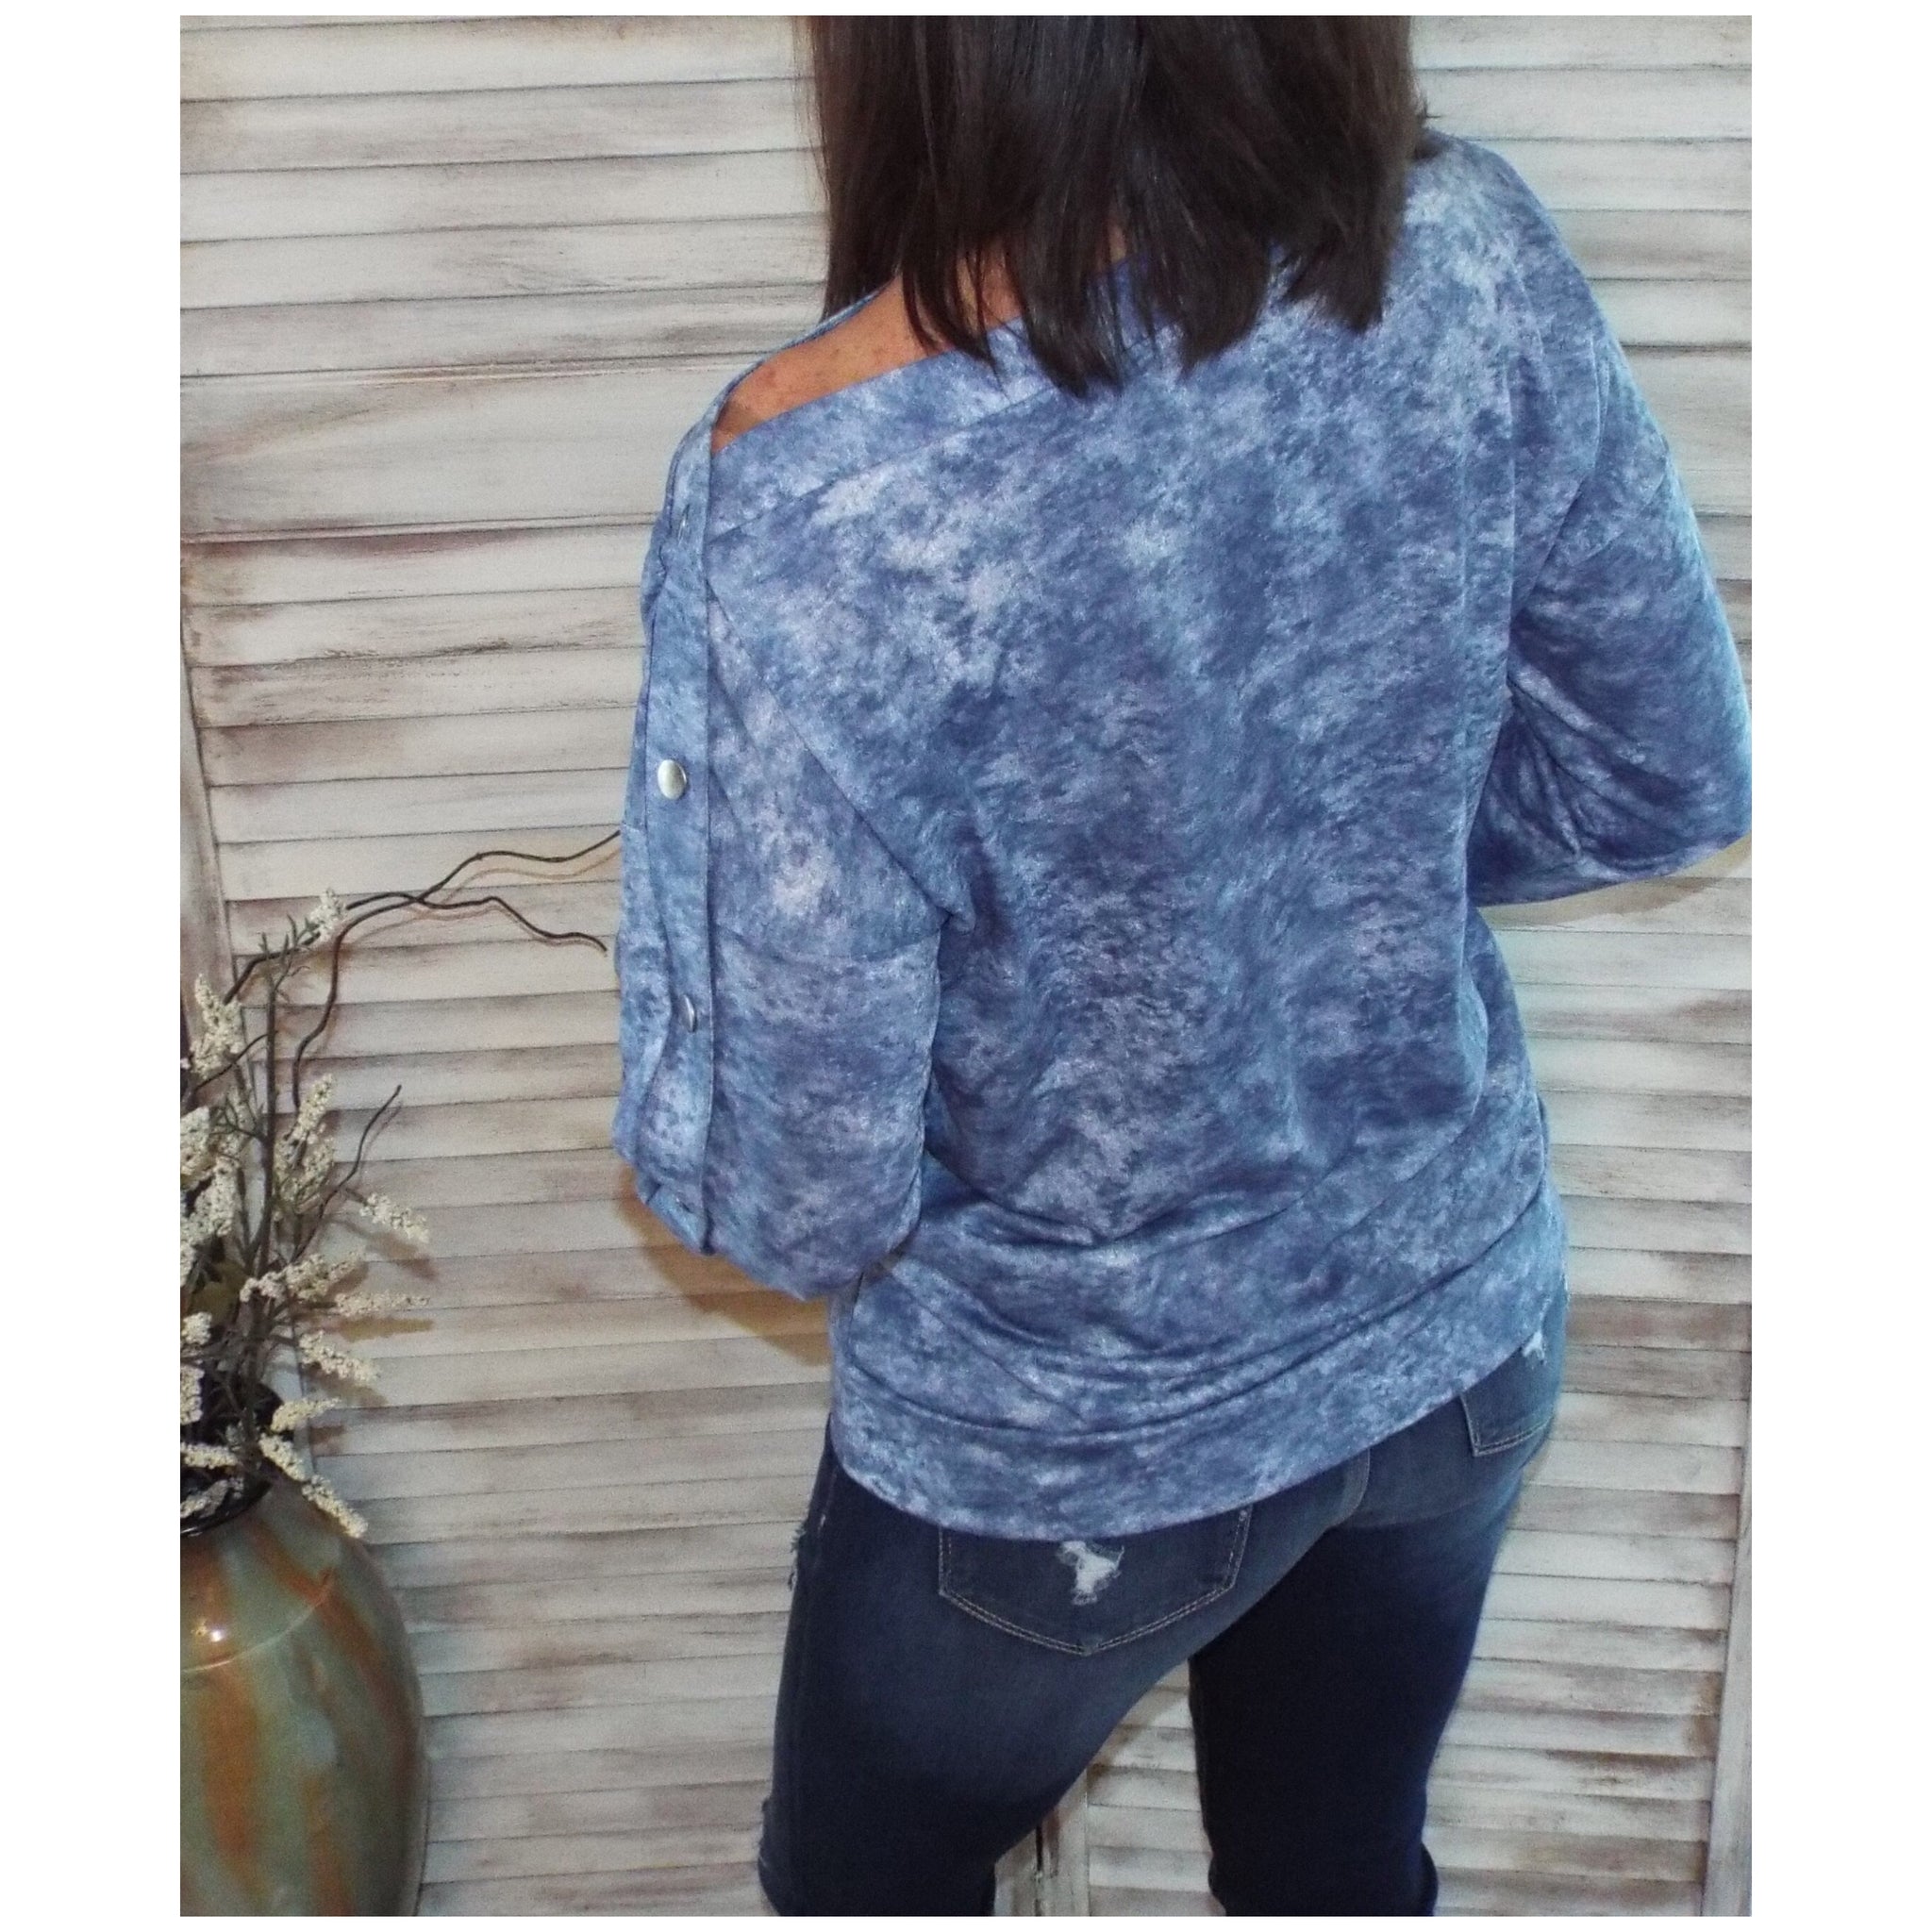 "That's a Wrap" Multi Tie Dye Snap Detail Thermal Wide Neck Off Shoulder Banded Blue Top S/M/L